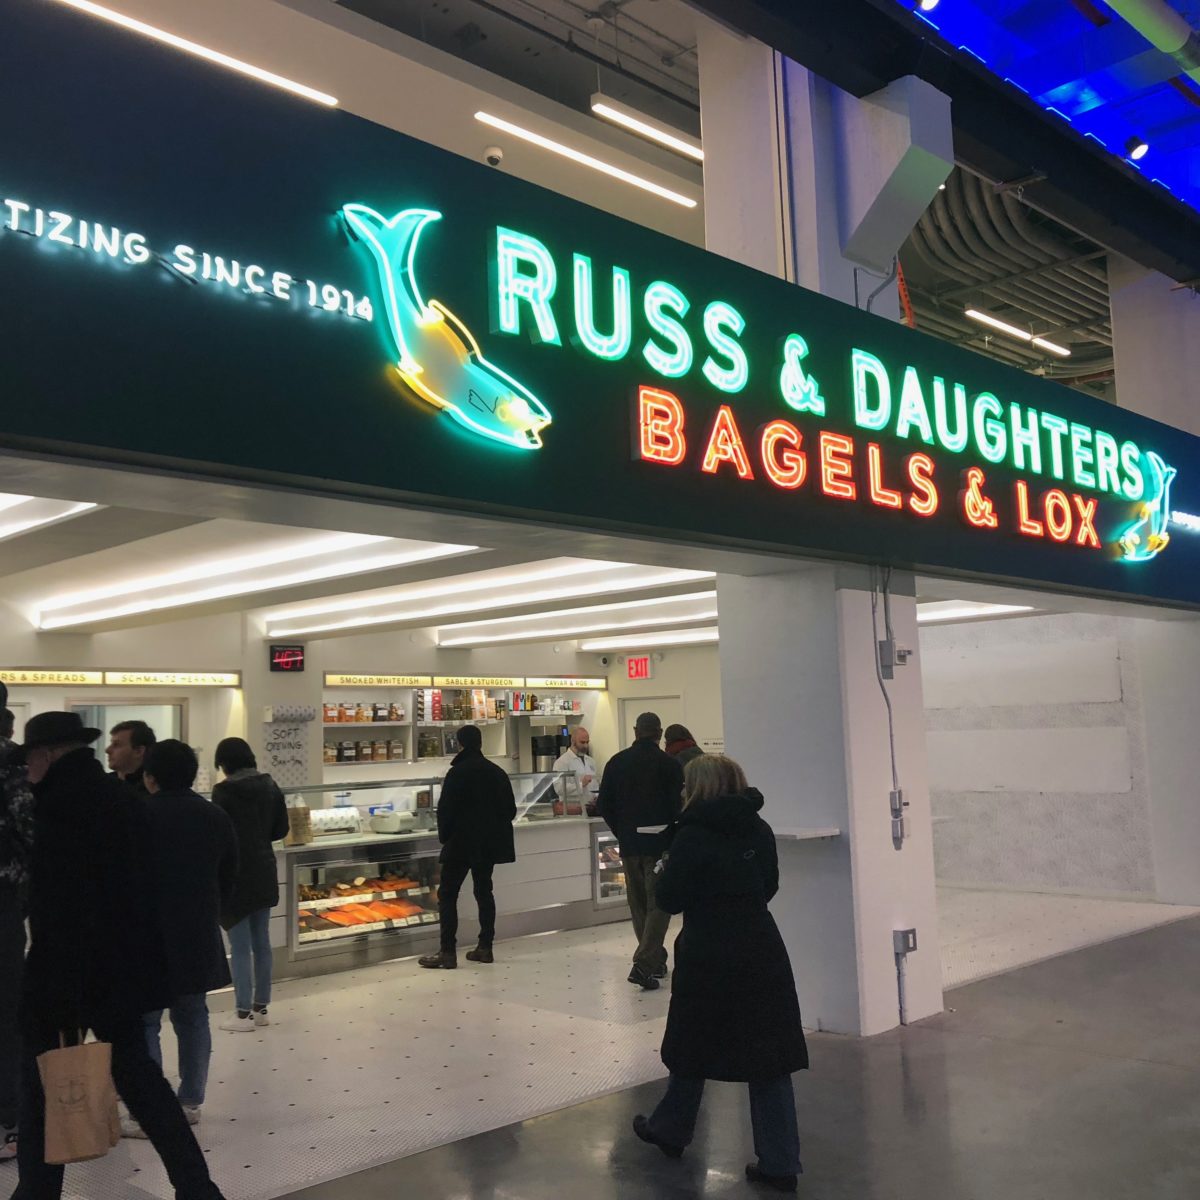 A bright but old-fashioned looking neon sign at a retail shop that has a fish graphics and reads Russ and Daughters Bagels and Lox appetizing since 1914